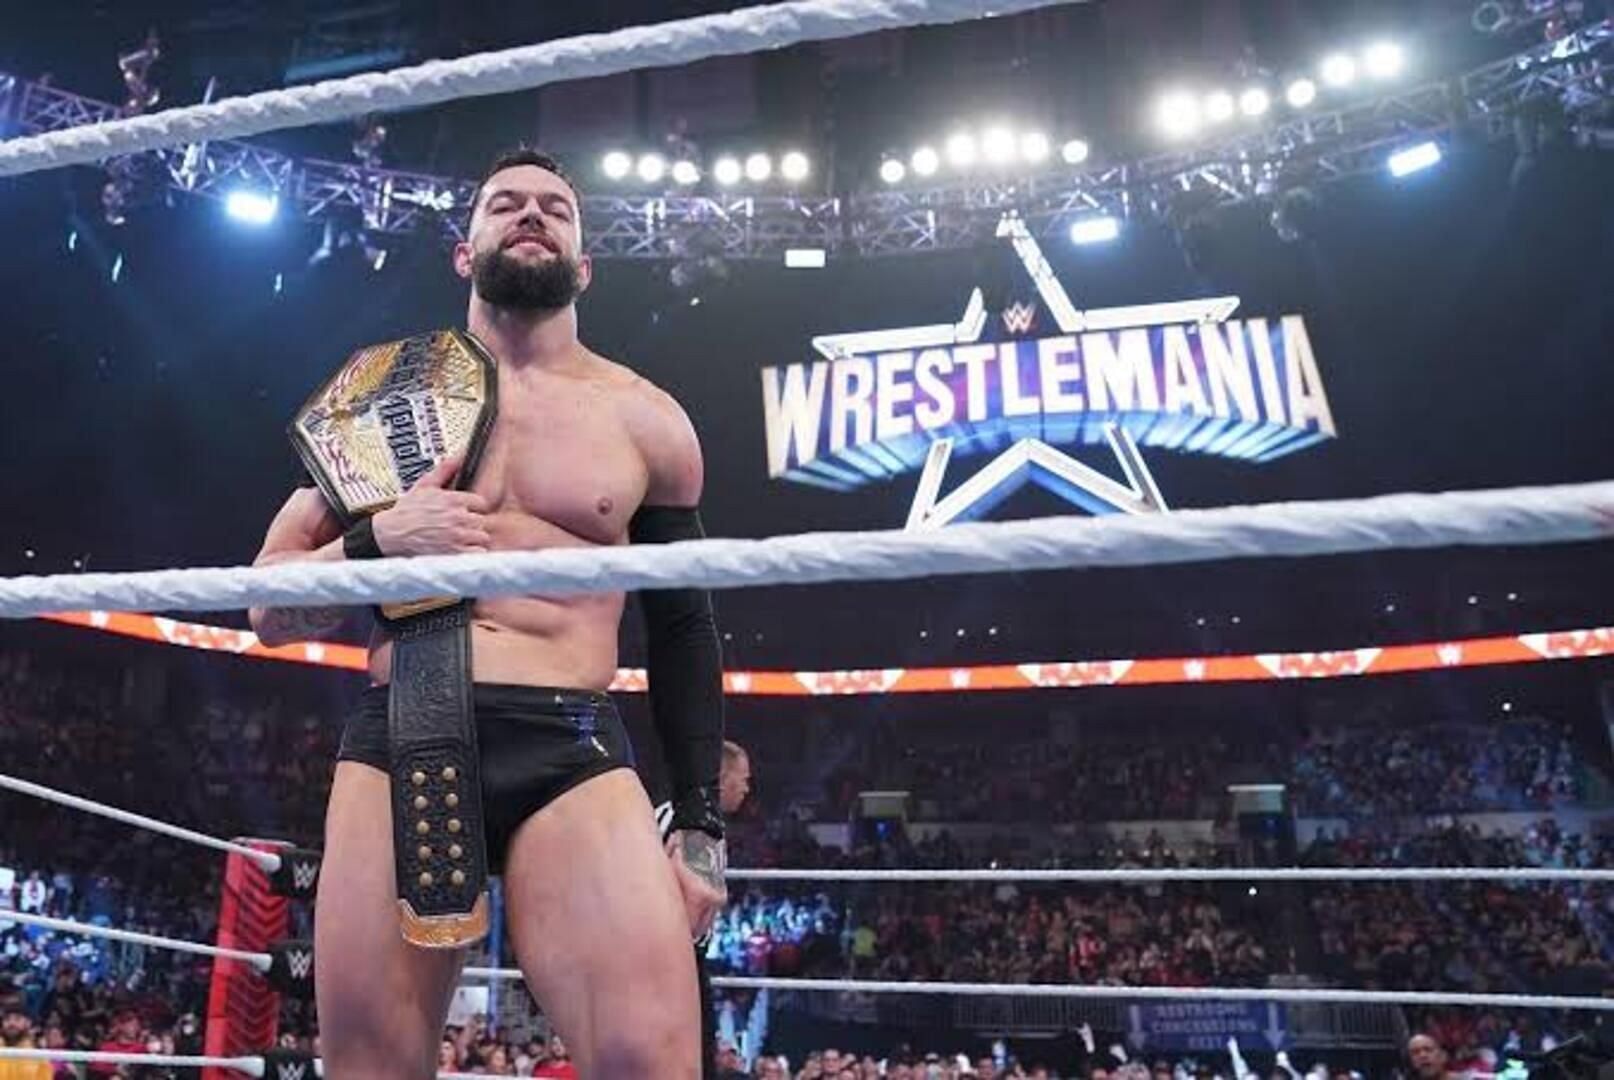 Finn Balor is the United States Champion